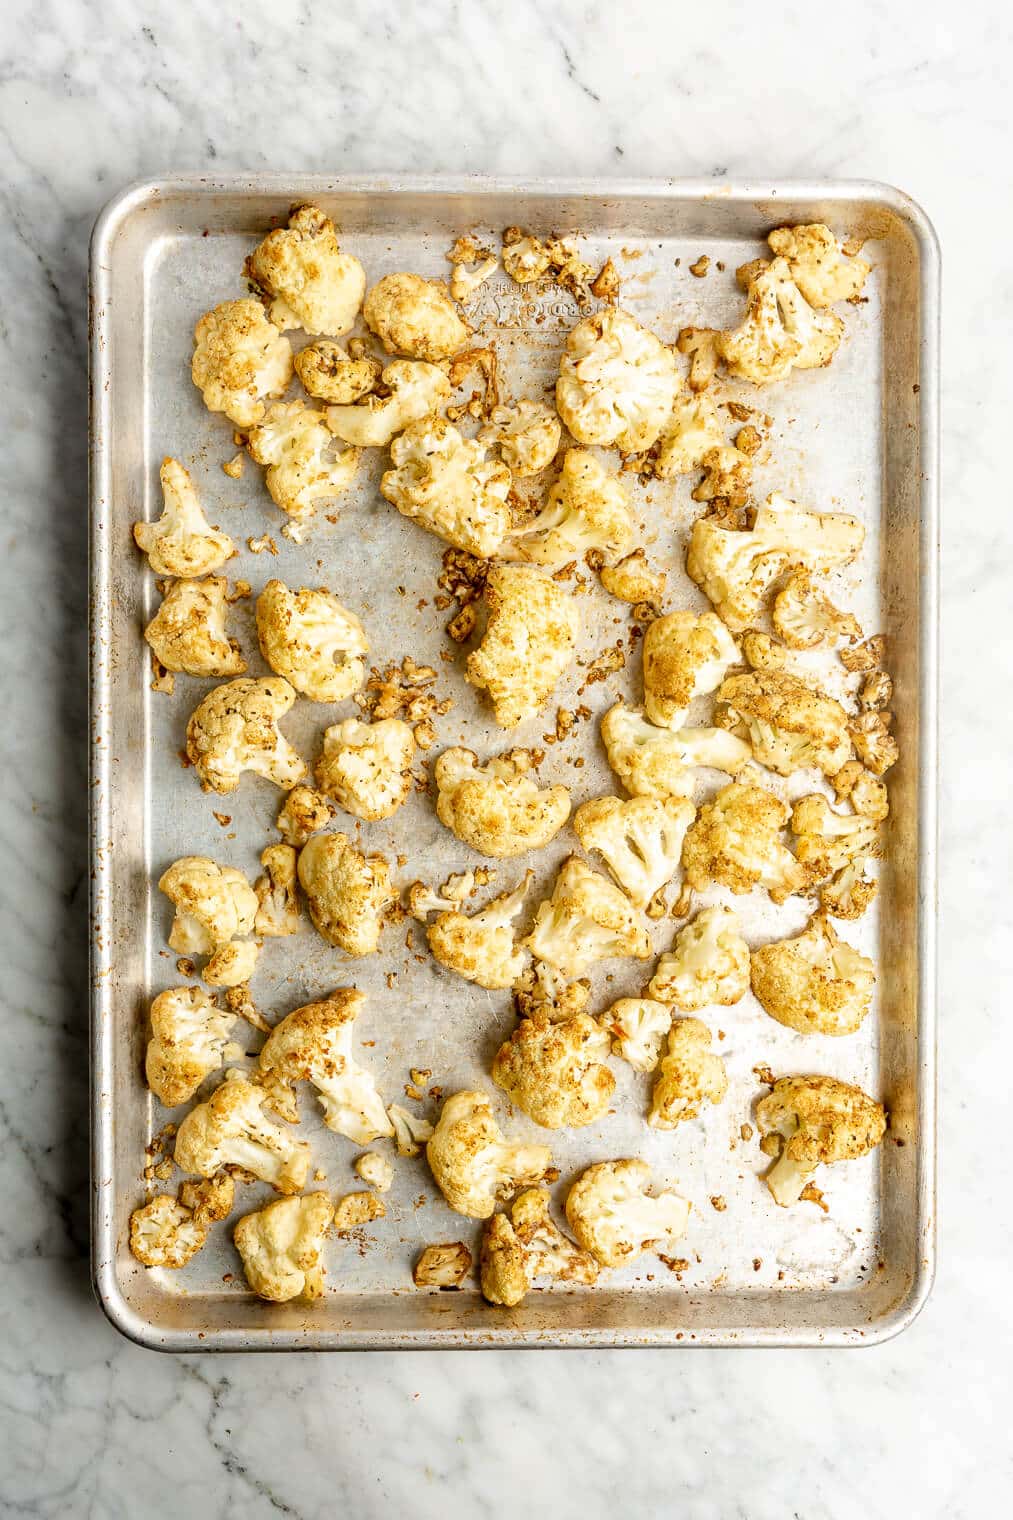 A sheet pan of partially cooked cauliflower florets.